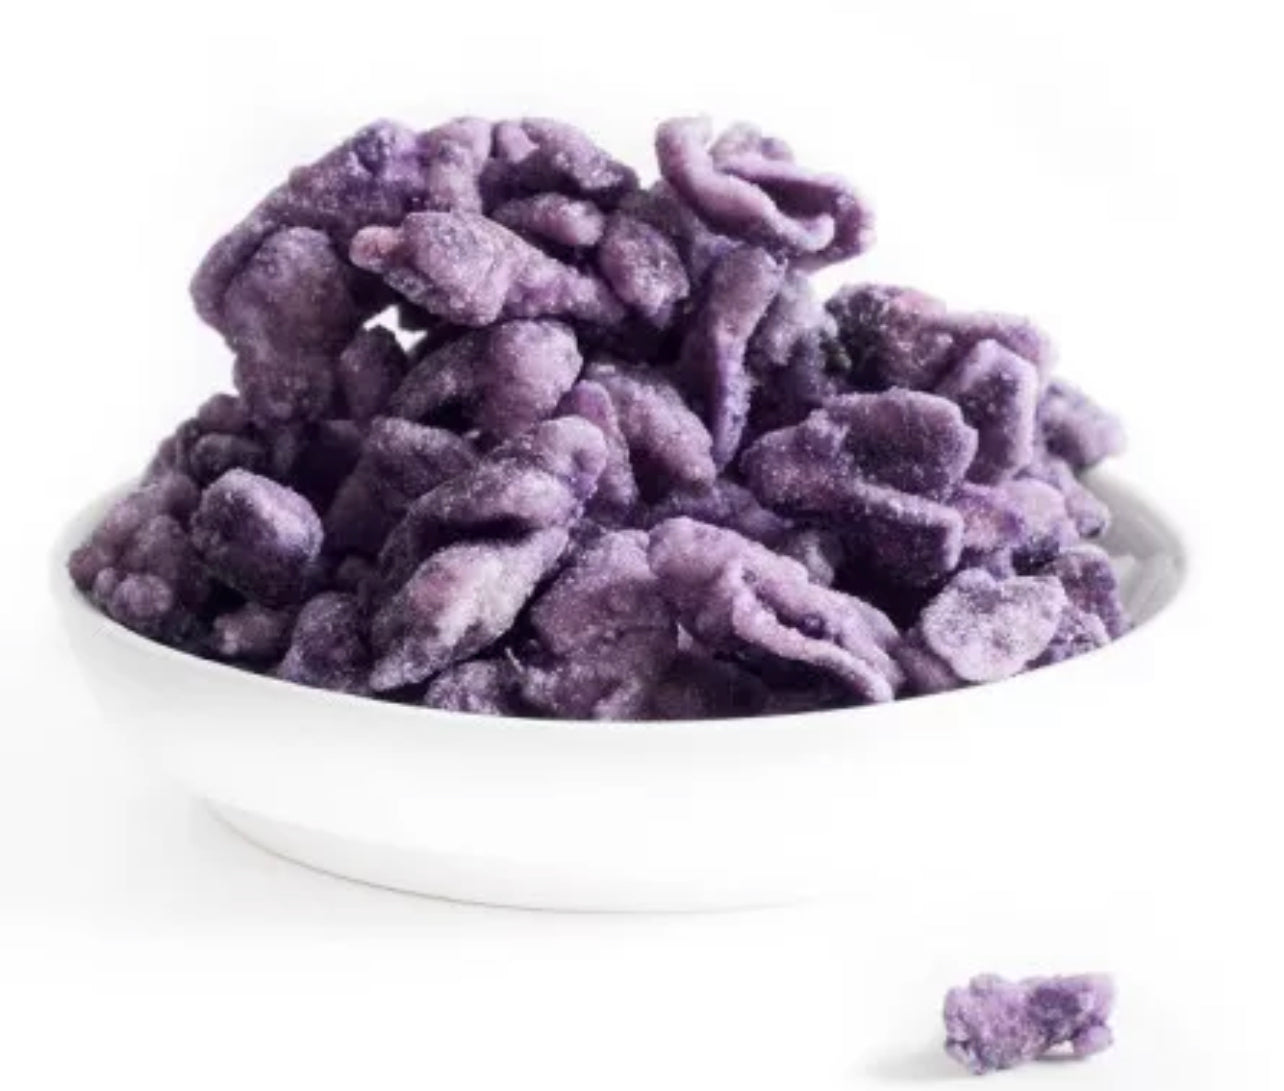 Whole crystallized violet flowers - 300g